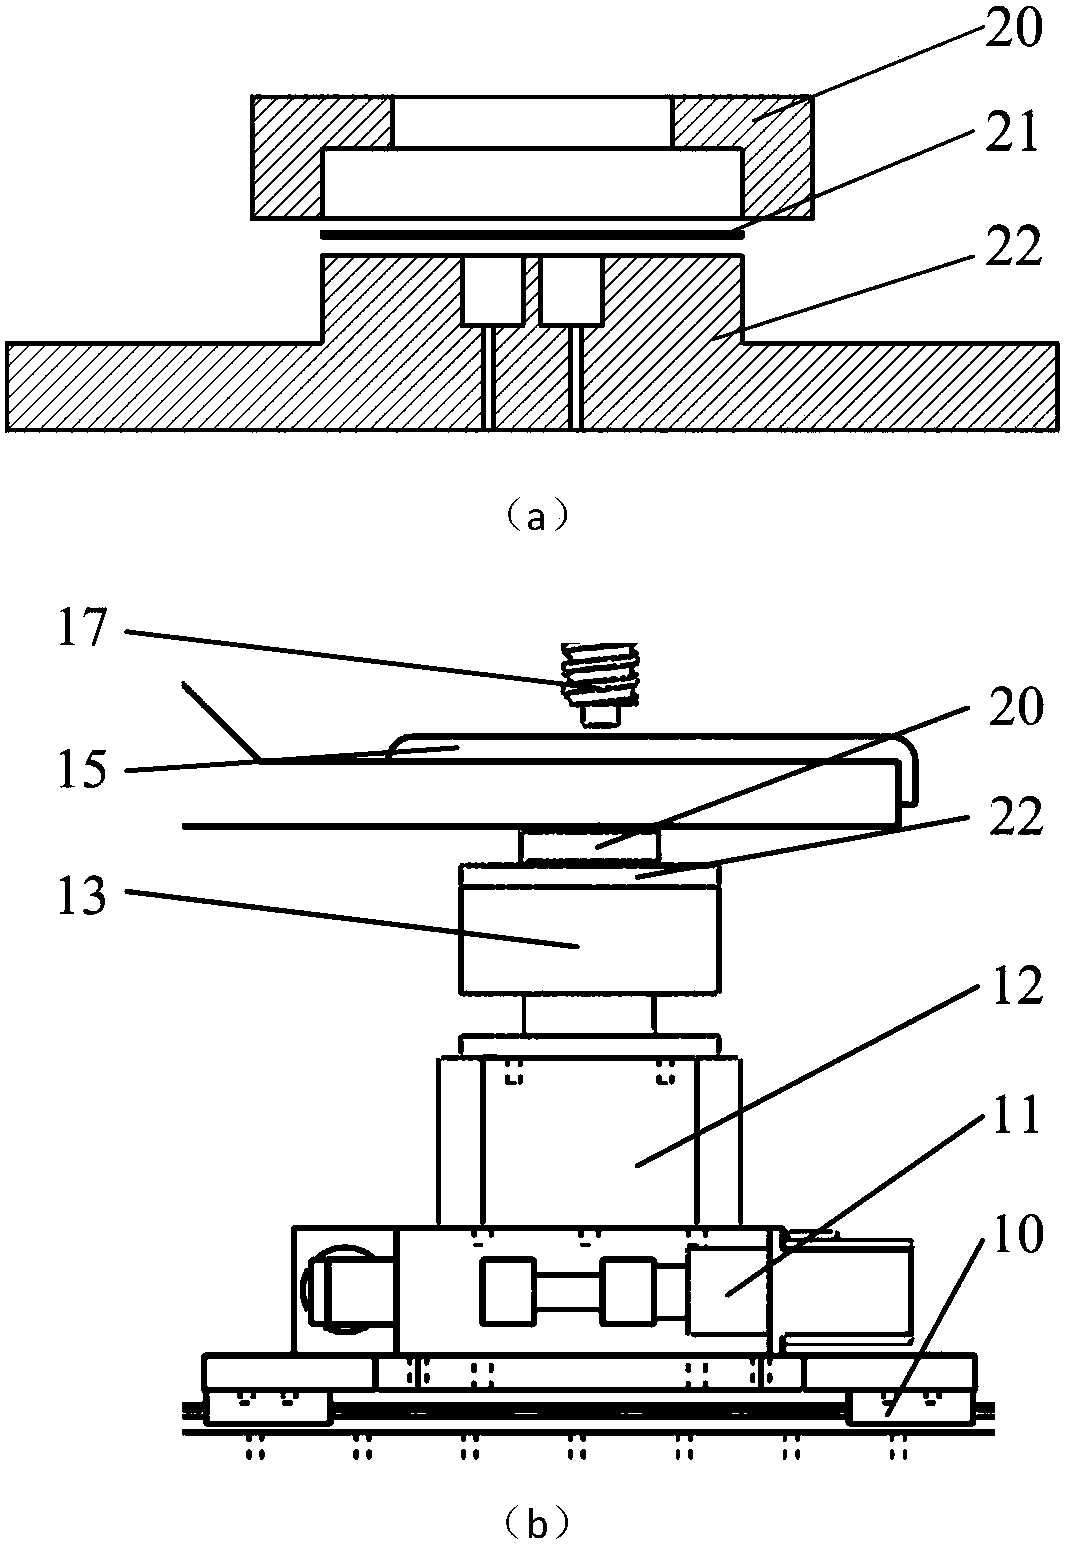 A high-precision fused silica microshell resonant structure processing equipment